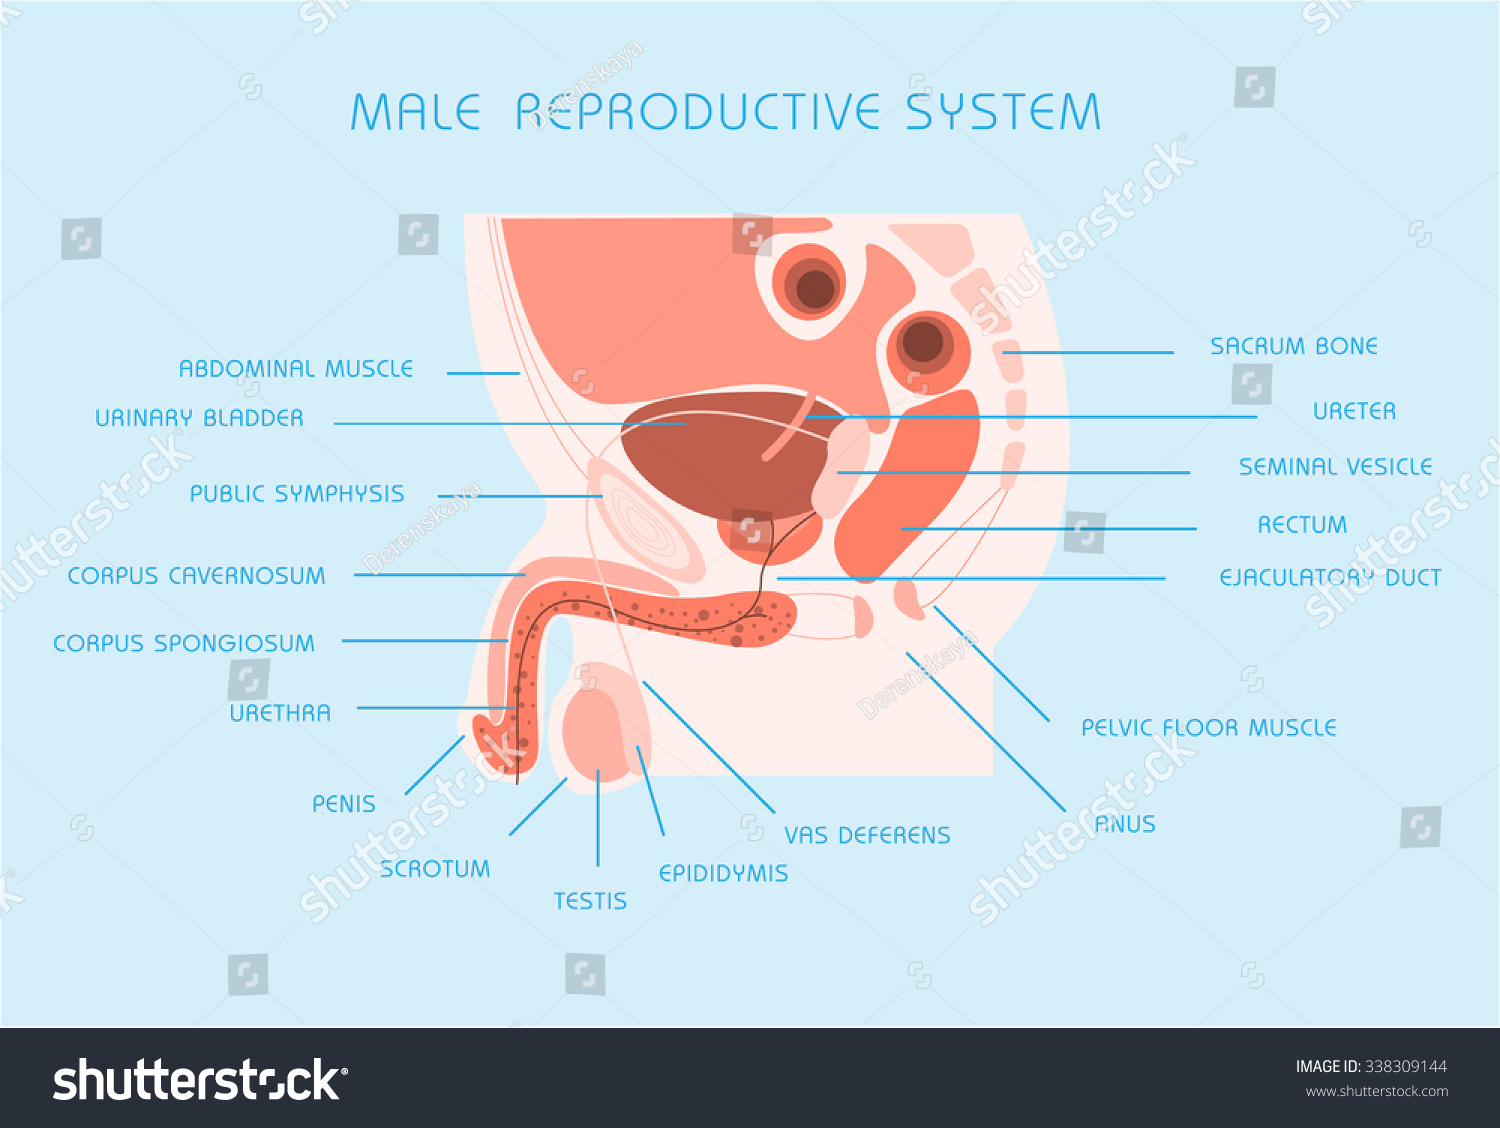 Male Reproductive System Vector Illustration 338309144